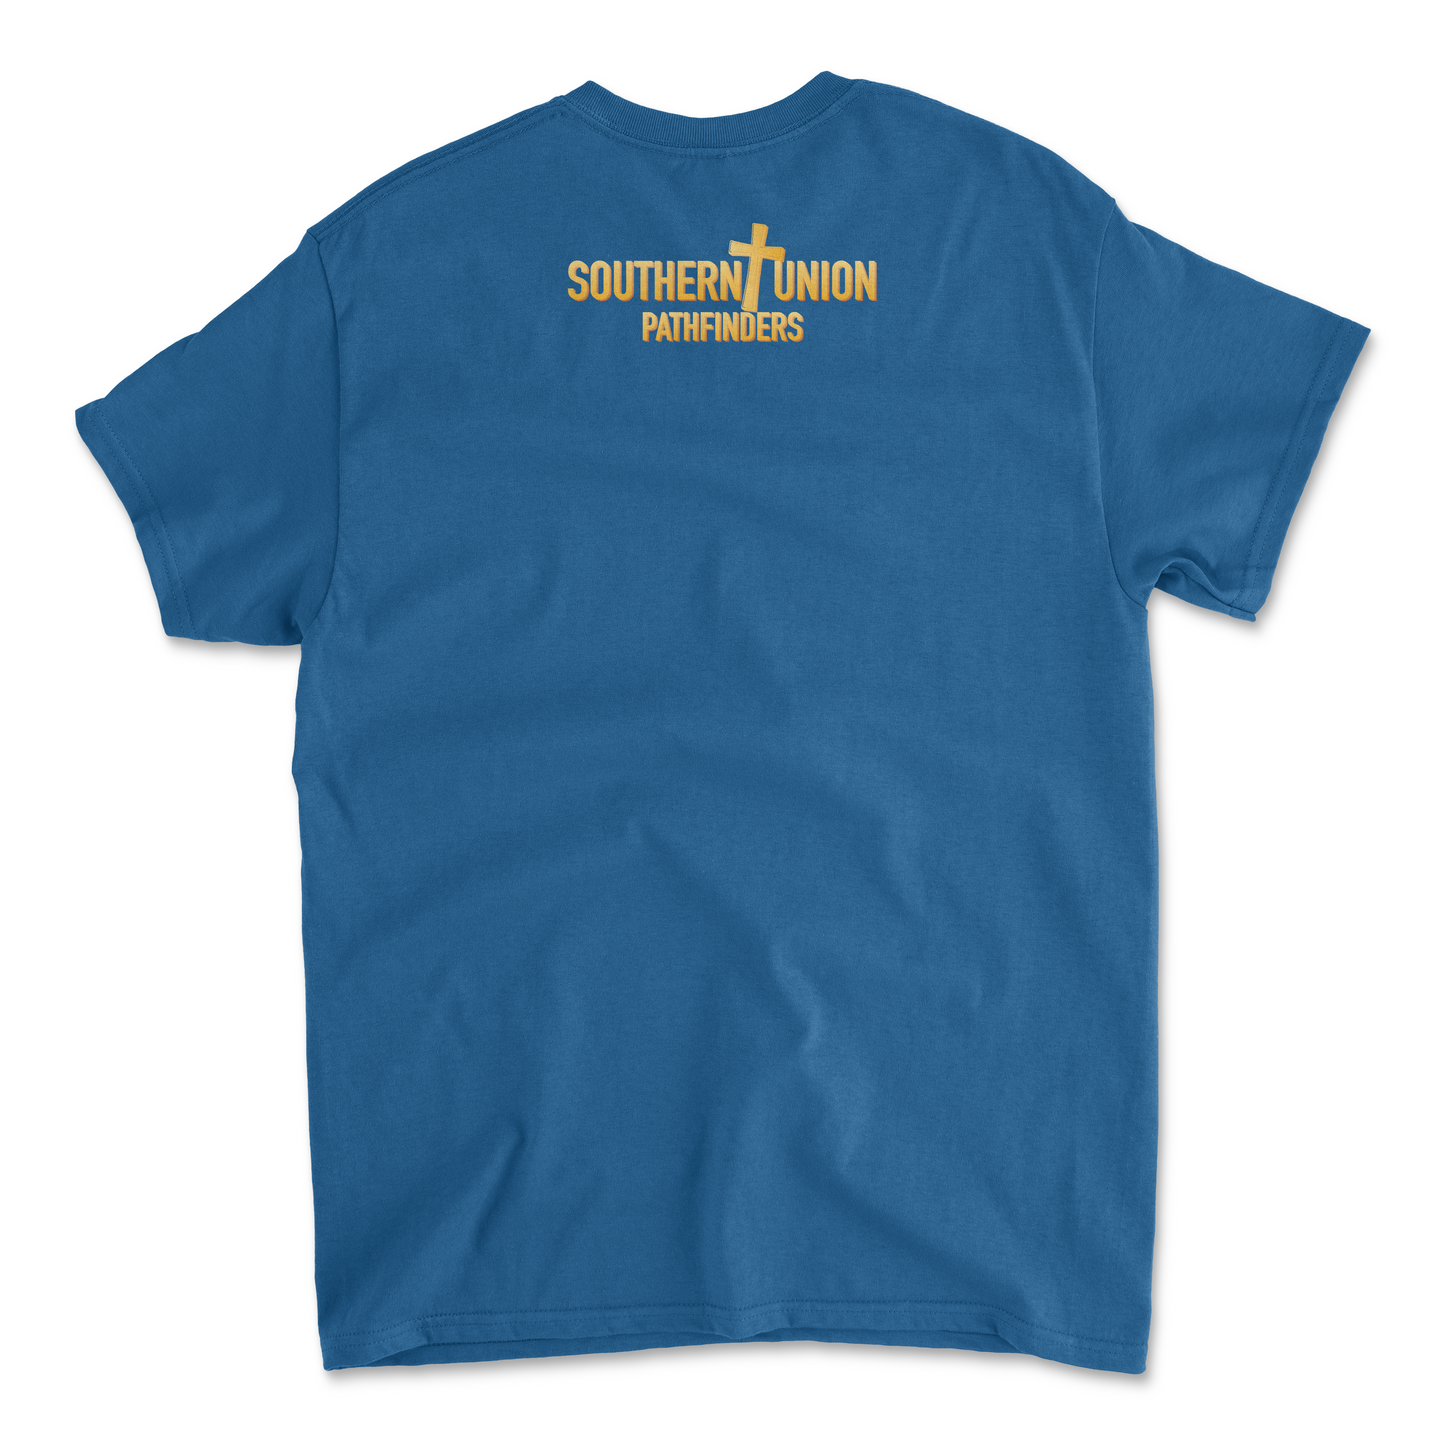 Official Southern Union Believe the Promise Camporee T-shirt